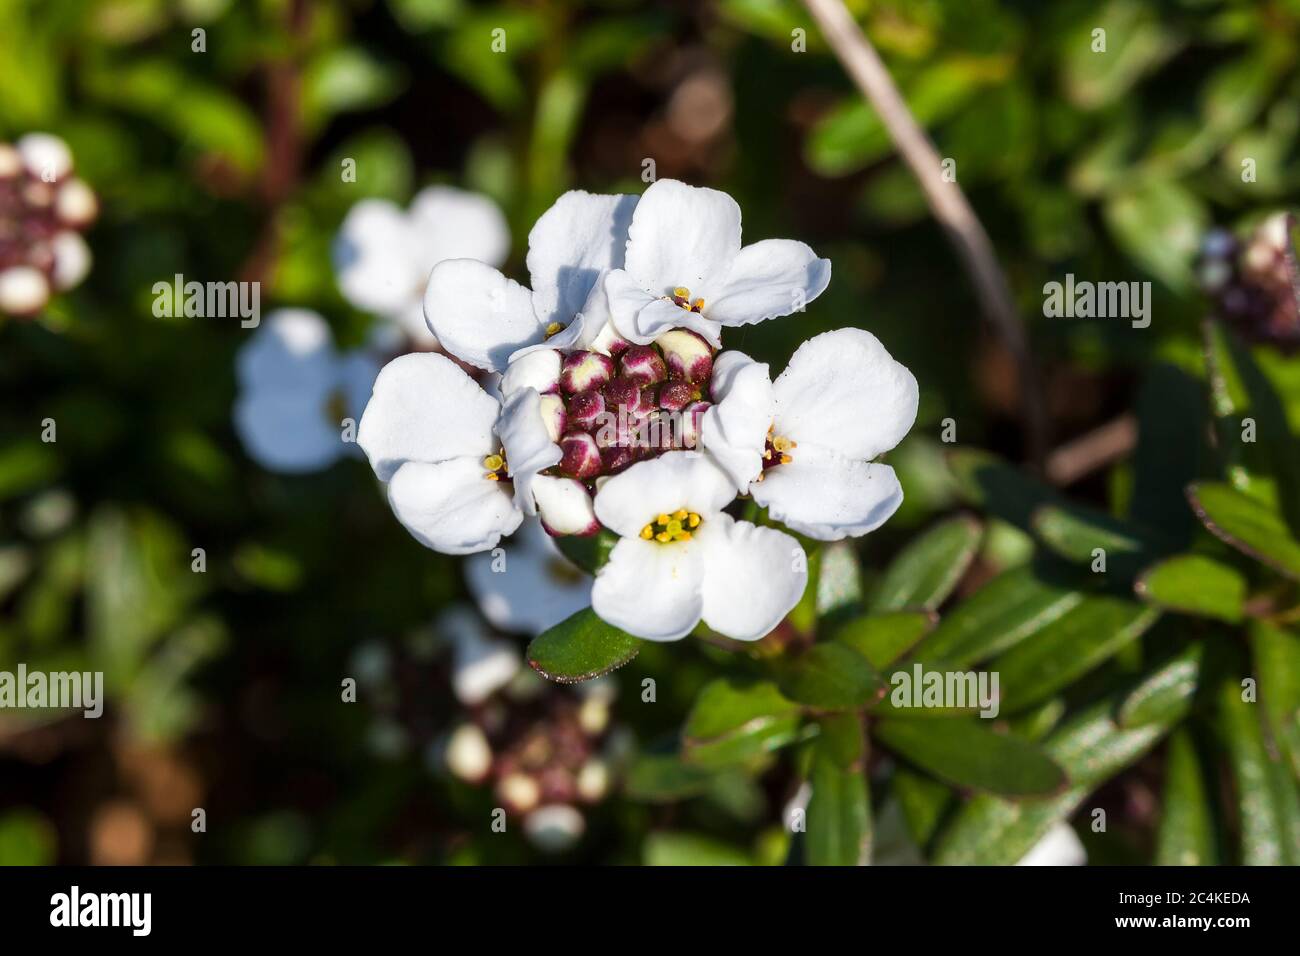 Iberis sempervirens 'Snowflake' a spring summer white perennial bulbous flower plant commonly known as perennial candytuft Stock Photo